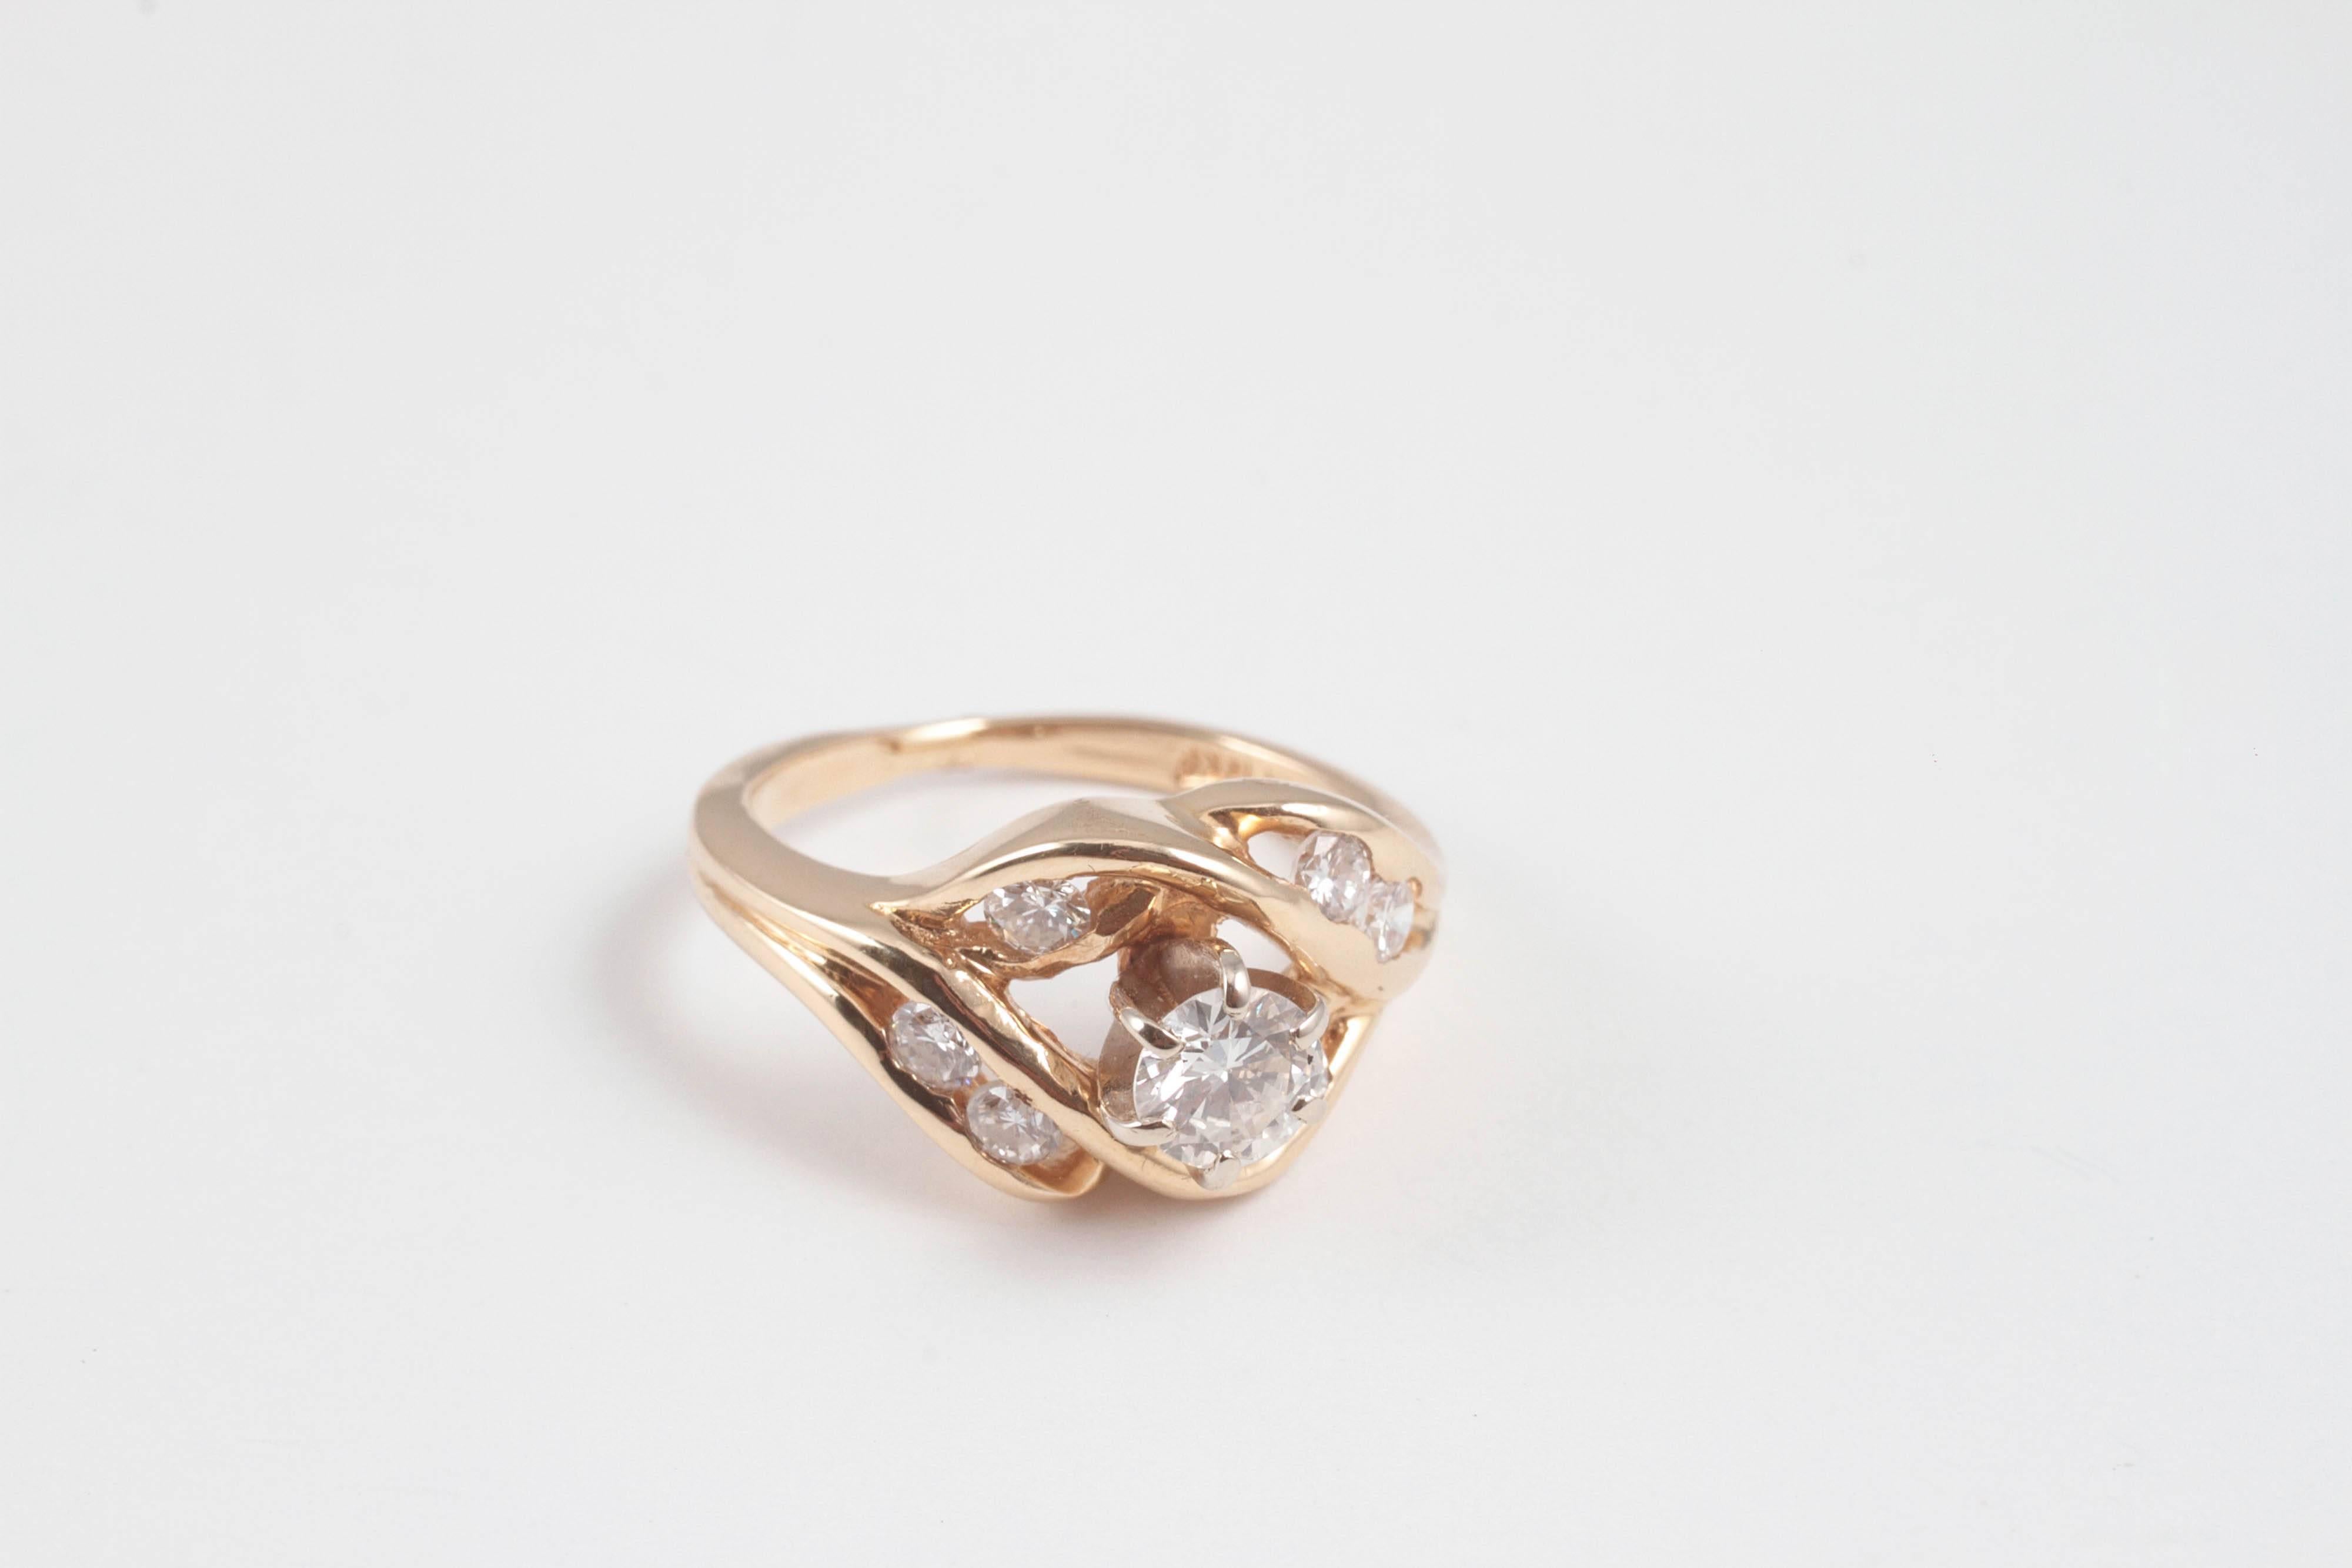 1.00 Carat Diamond Ring in 14 Karat Yellow Gold In Good Condition For Sale In Dallas, TX